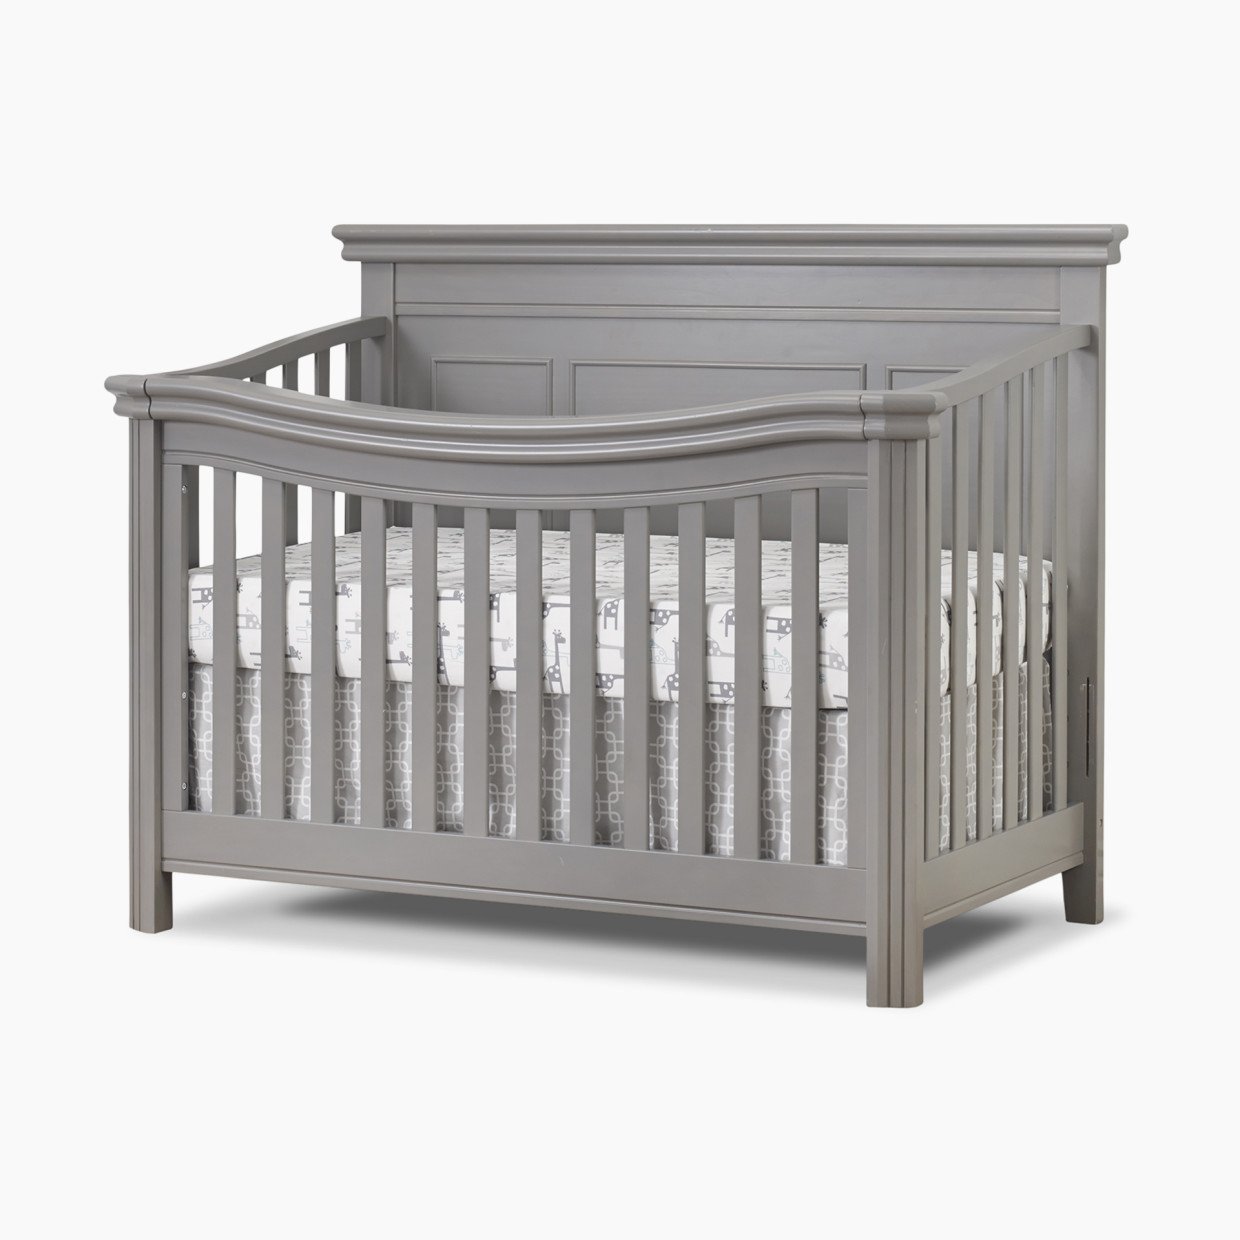 Sorelle Finley Lux Flat Top Crib - Weathered Gray.